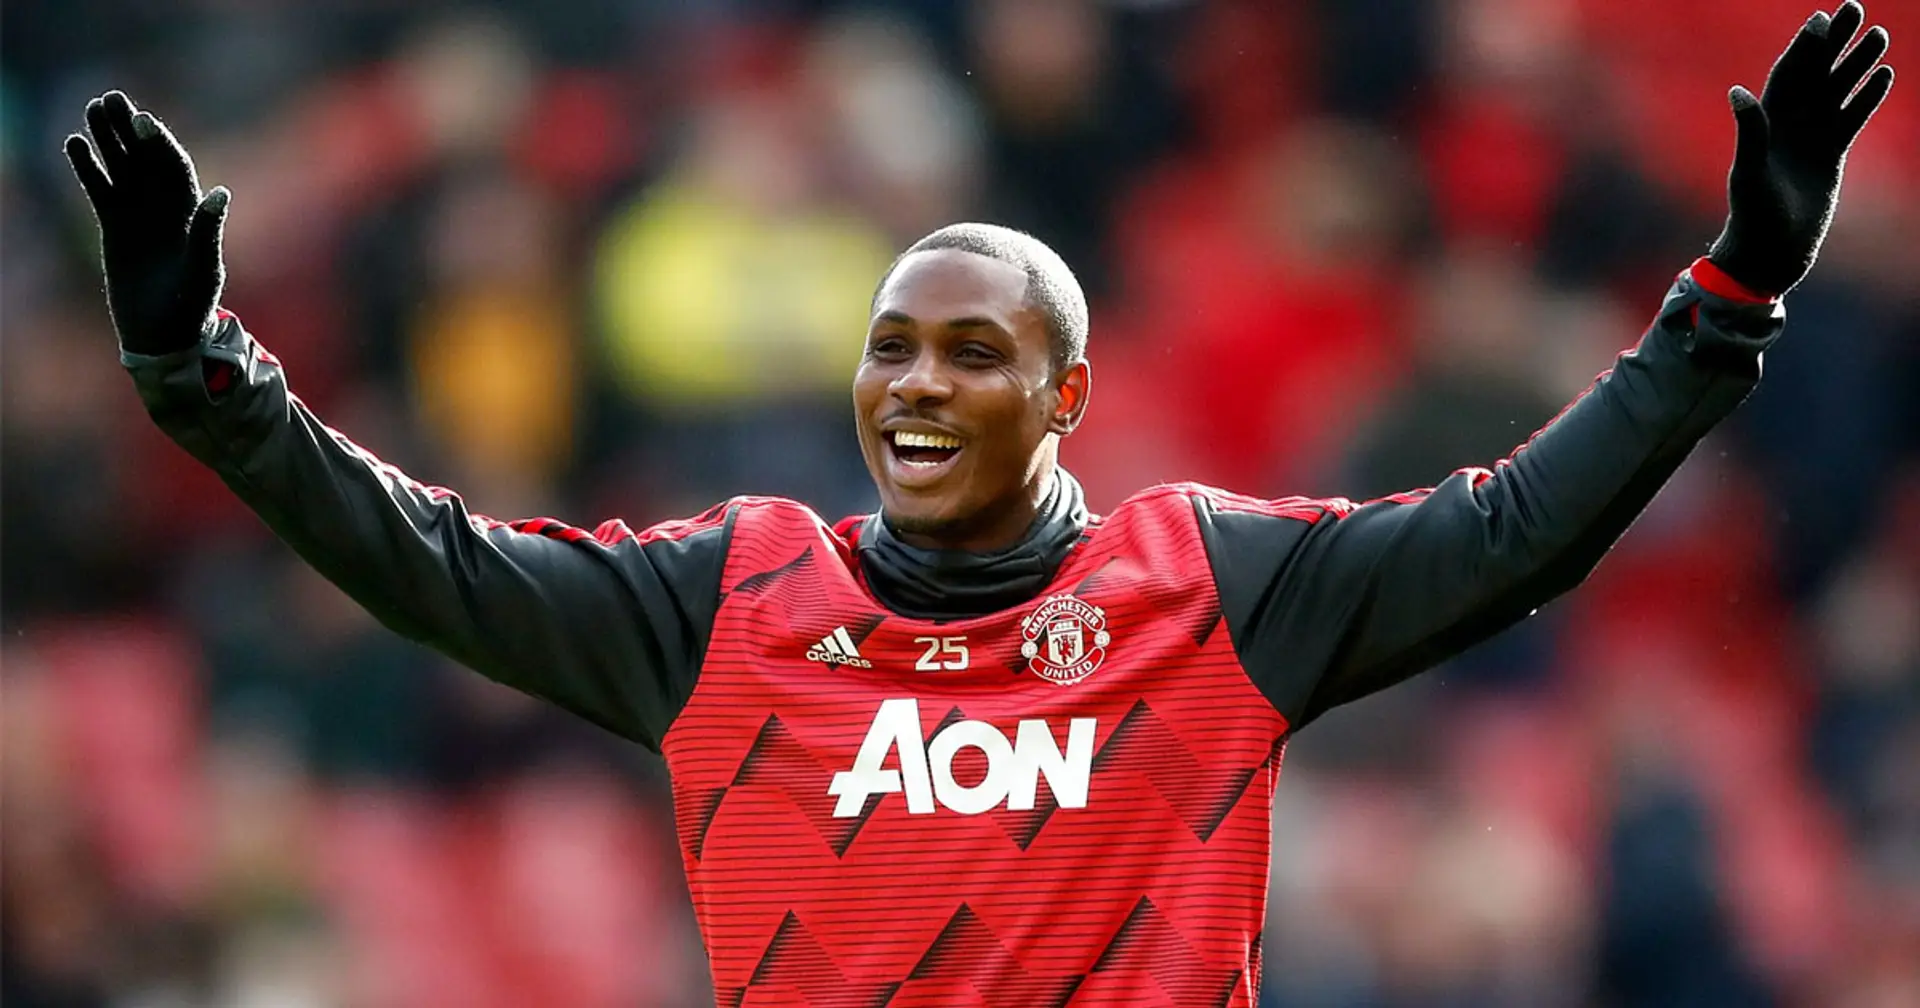 ‘When my team didn’t do well, I cried’: Ighalo opens up on how much joining United meant for him